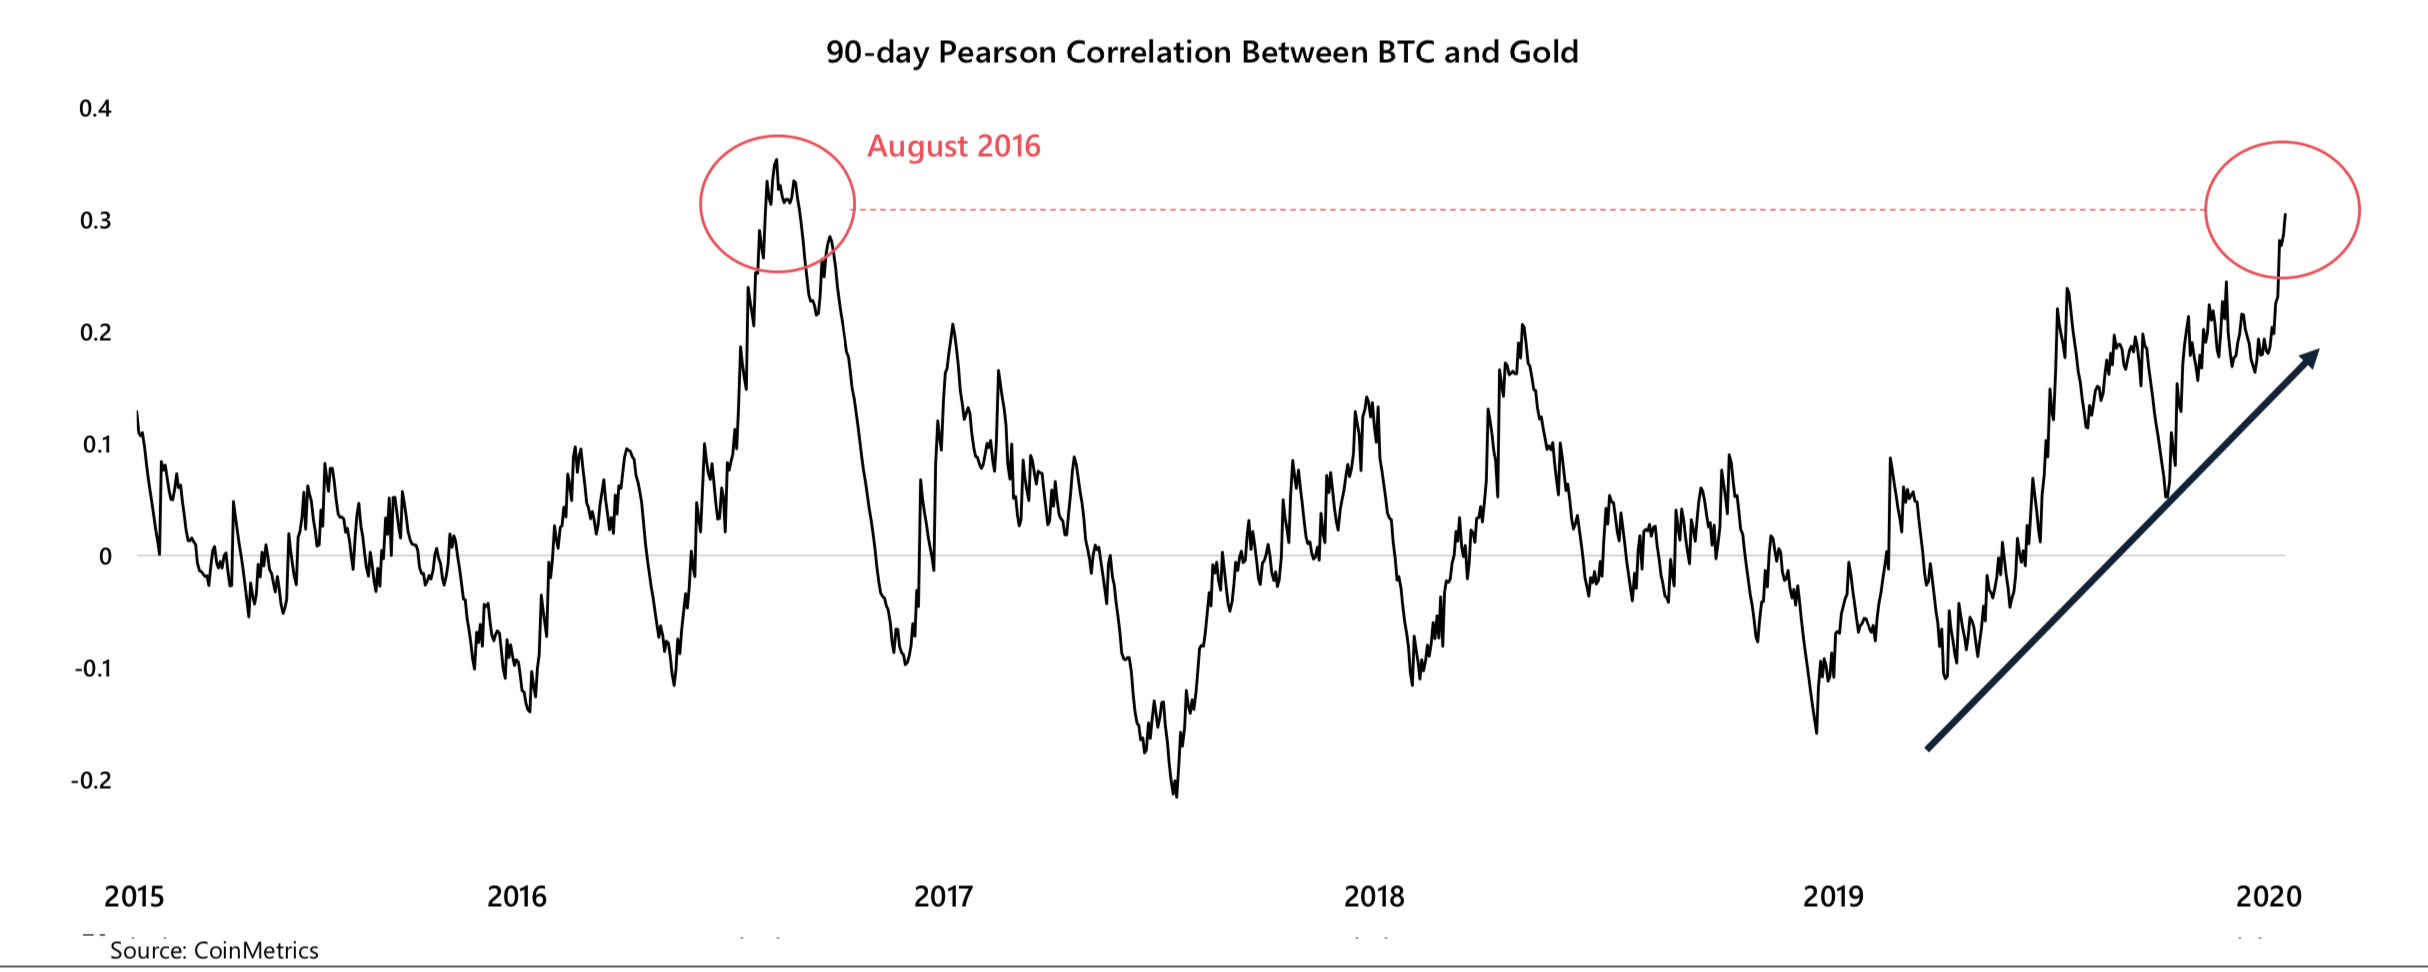 Gold Correlation With Bitcoin is at 4 Year High, And It's a High